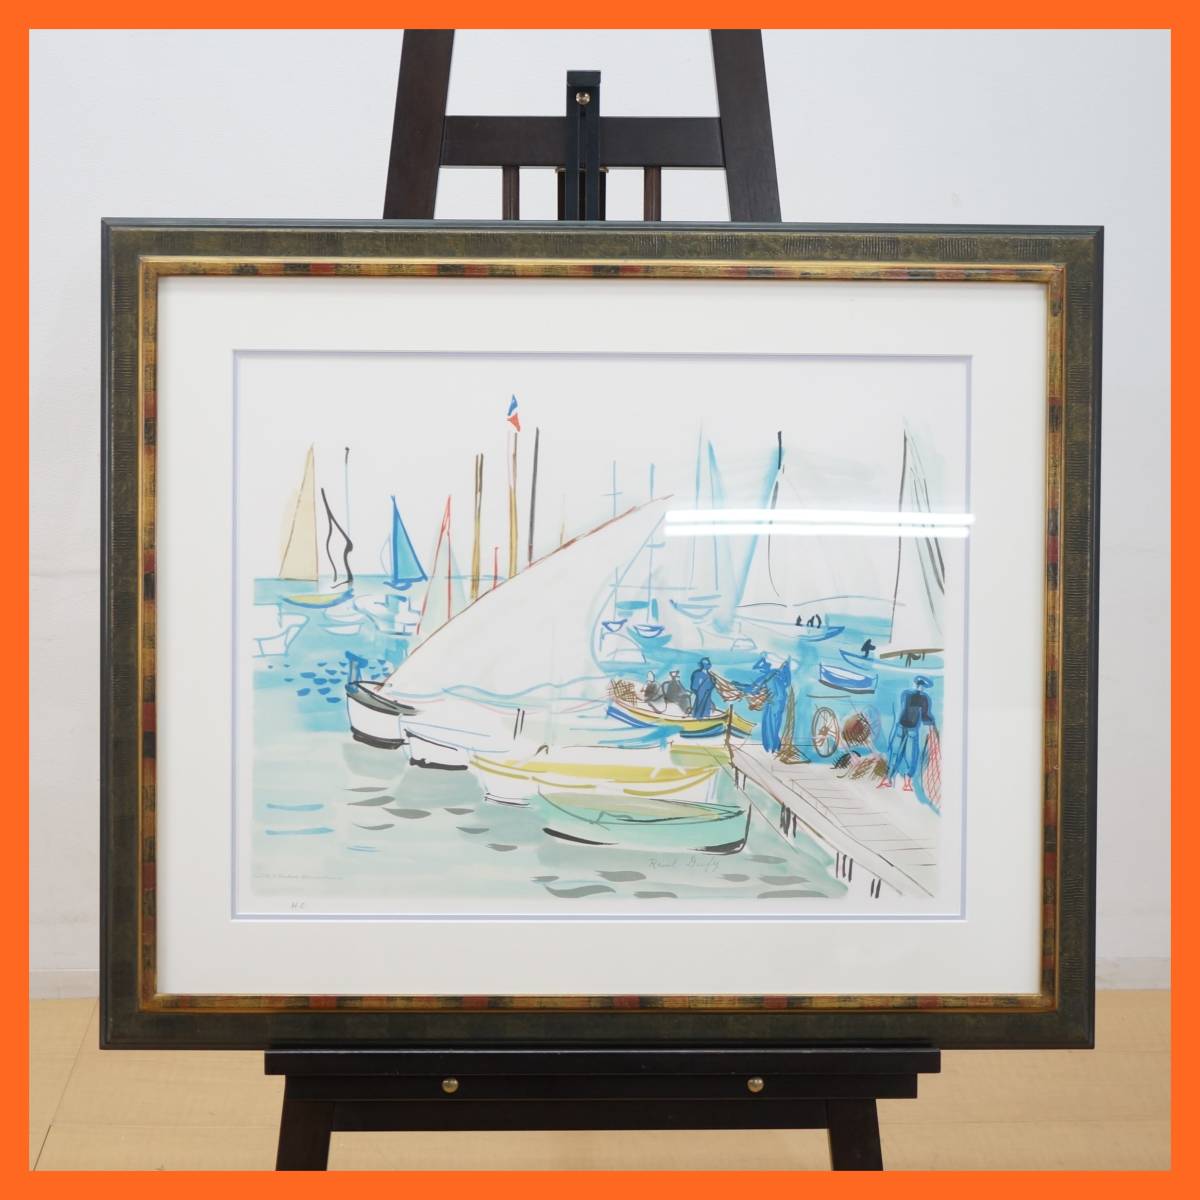 Toha: [Lithograph] Authentic Raoul Dufy Port Town Petit Badeau HC Not for sale version Size approx. 88.7 x 73.6 cm Modern French painting Art work ★Free shipping★, artwork, print, lithograph, lithograph